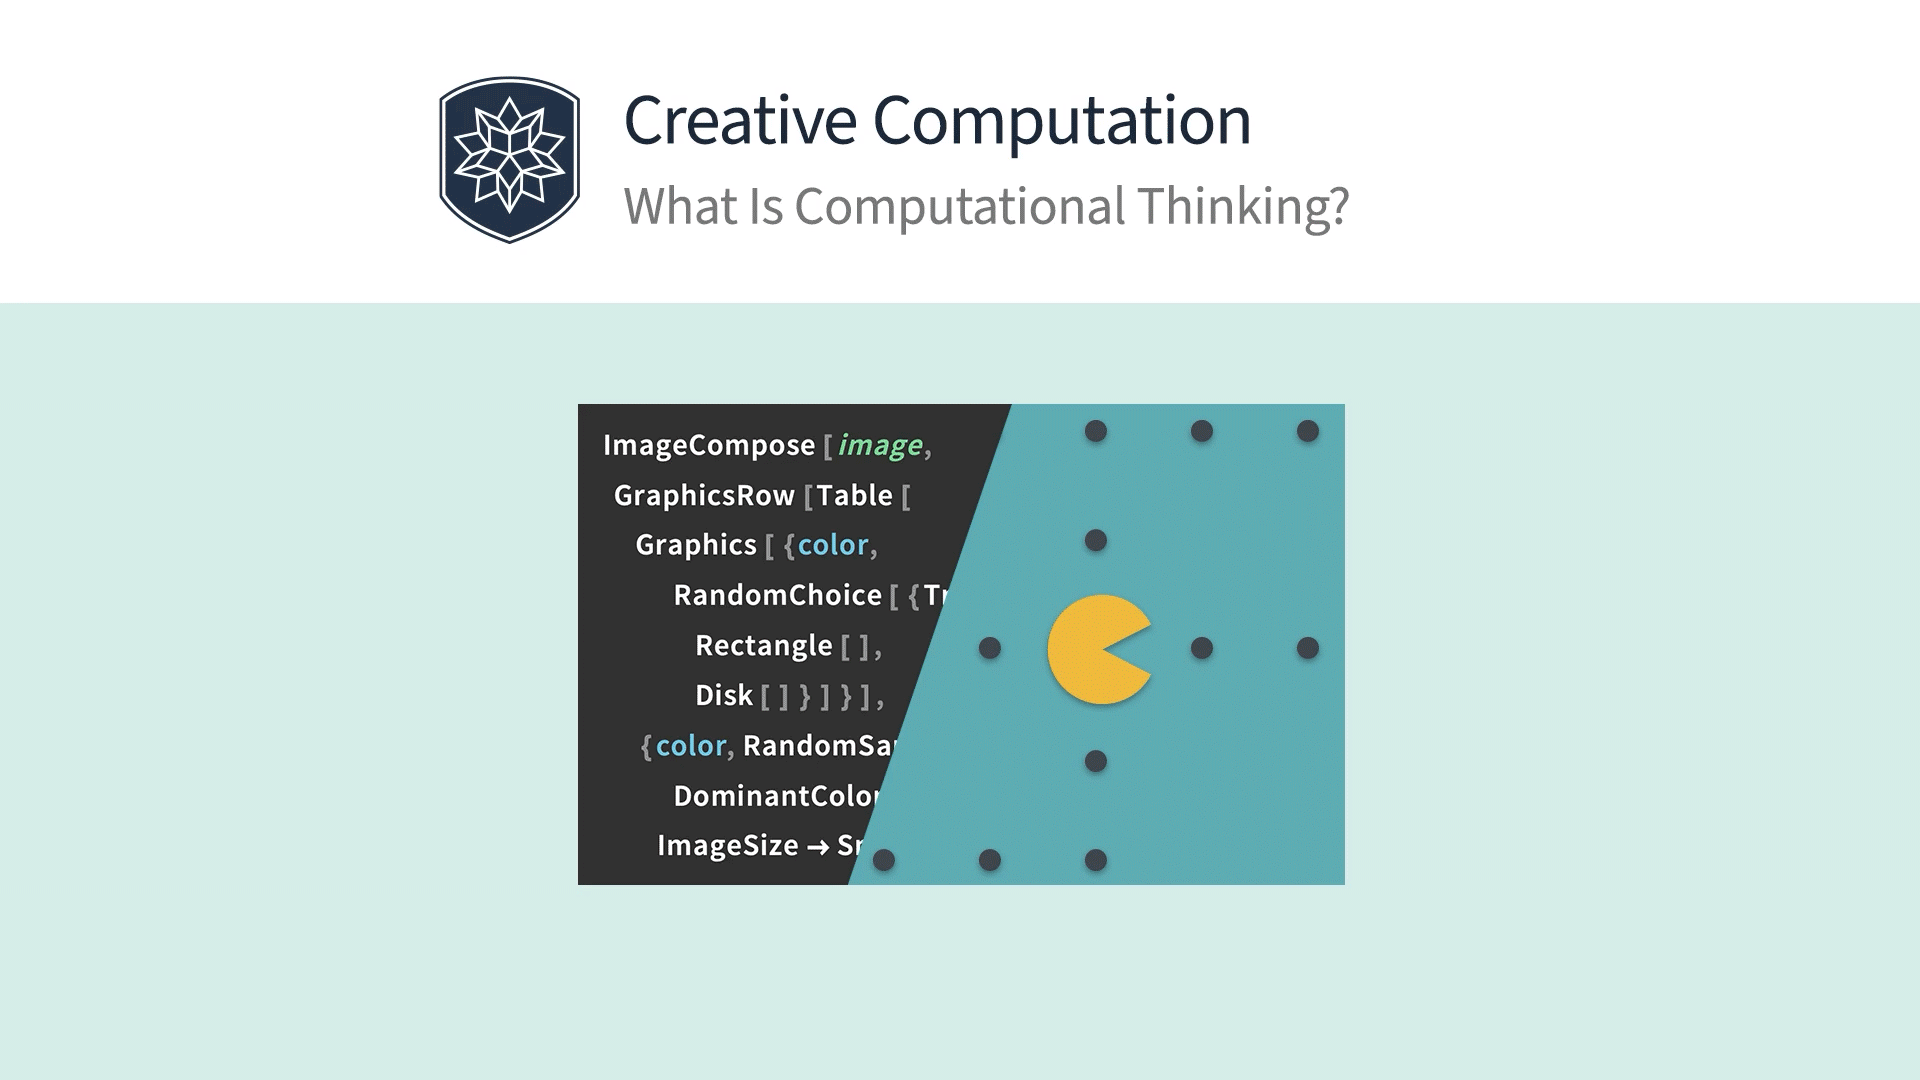 Animated GIF showing various slides from the Creative Computation course, including slides on computational thinking and learning objectives